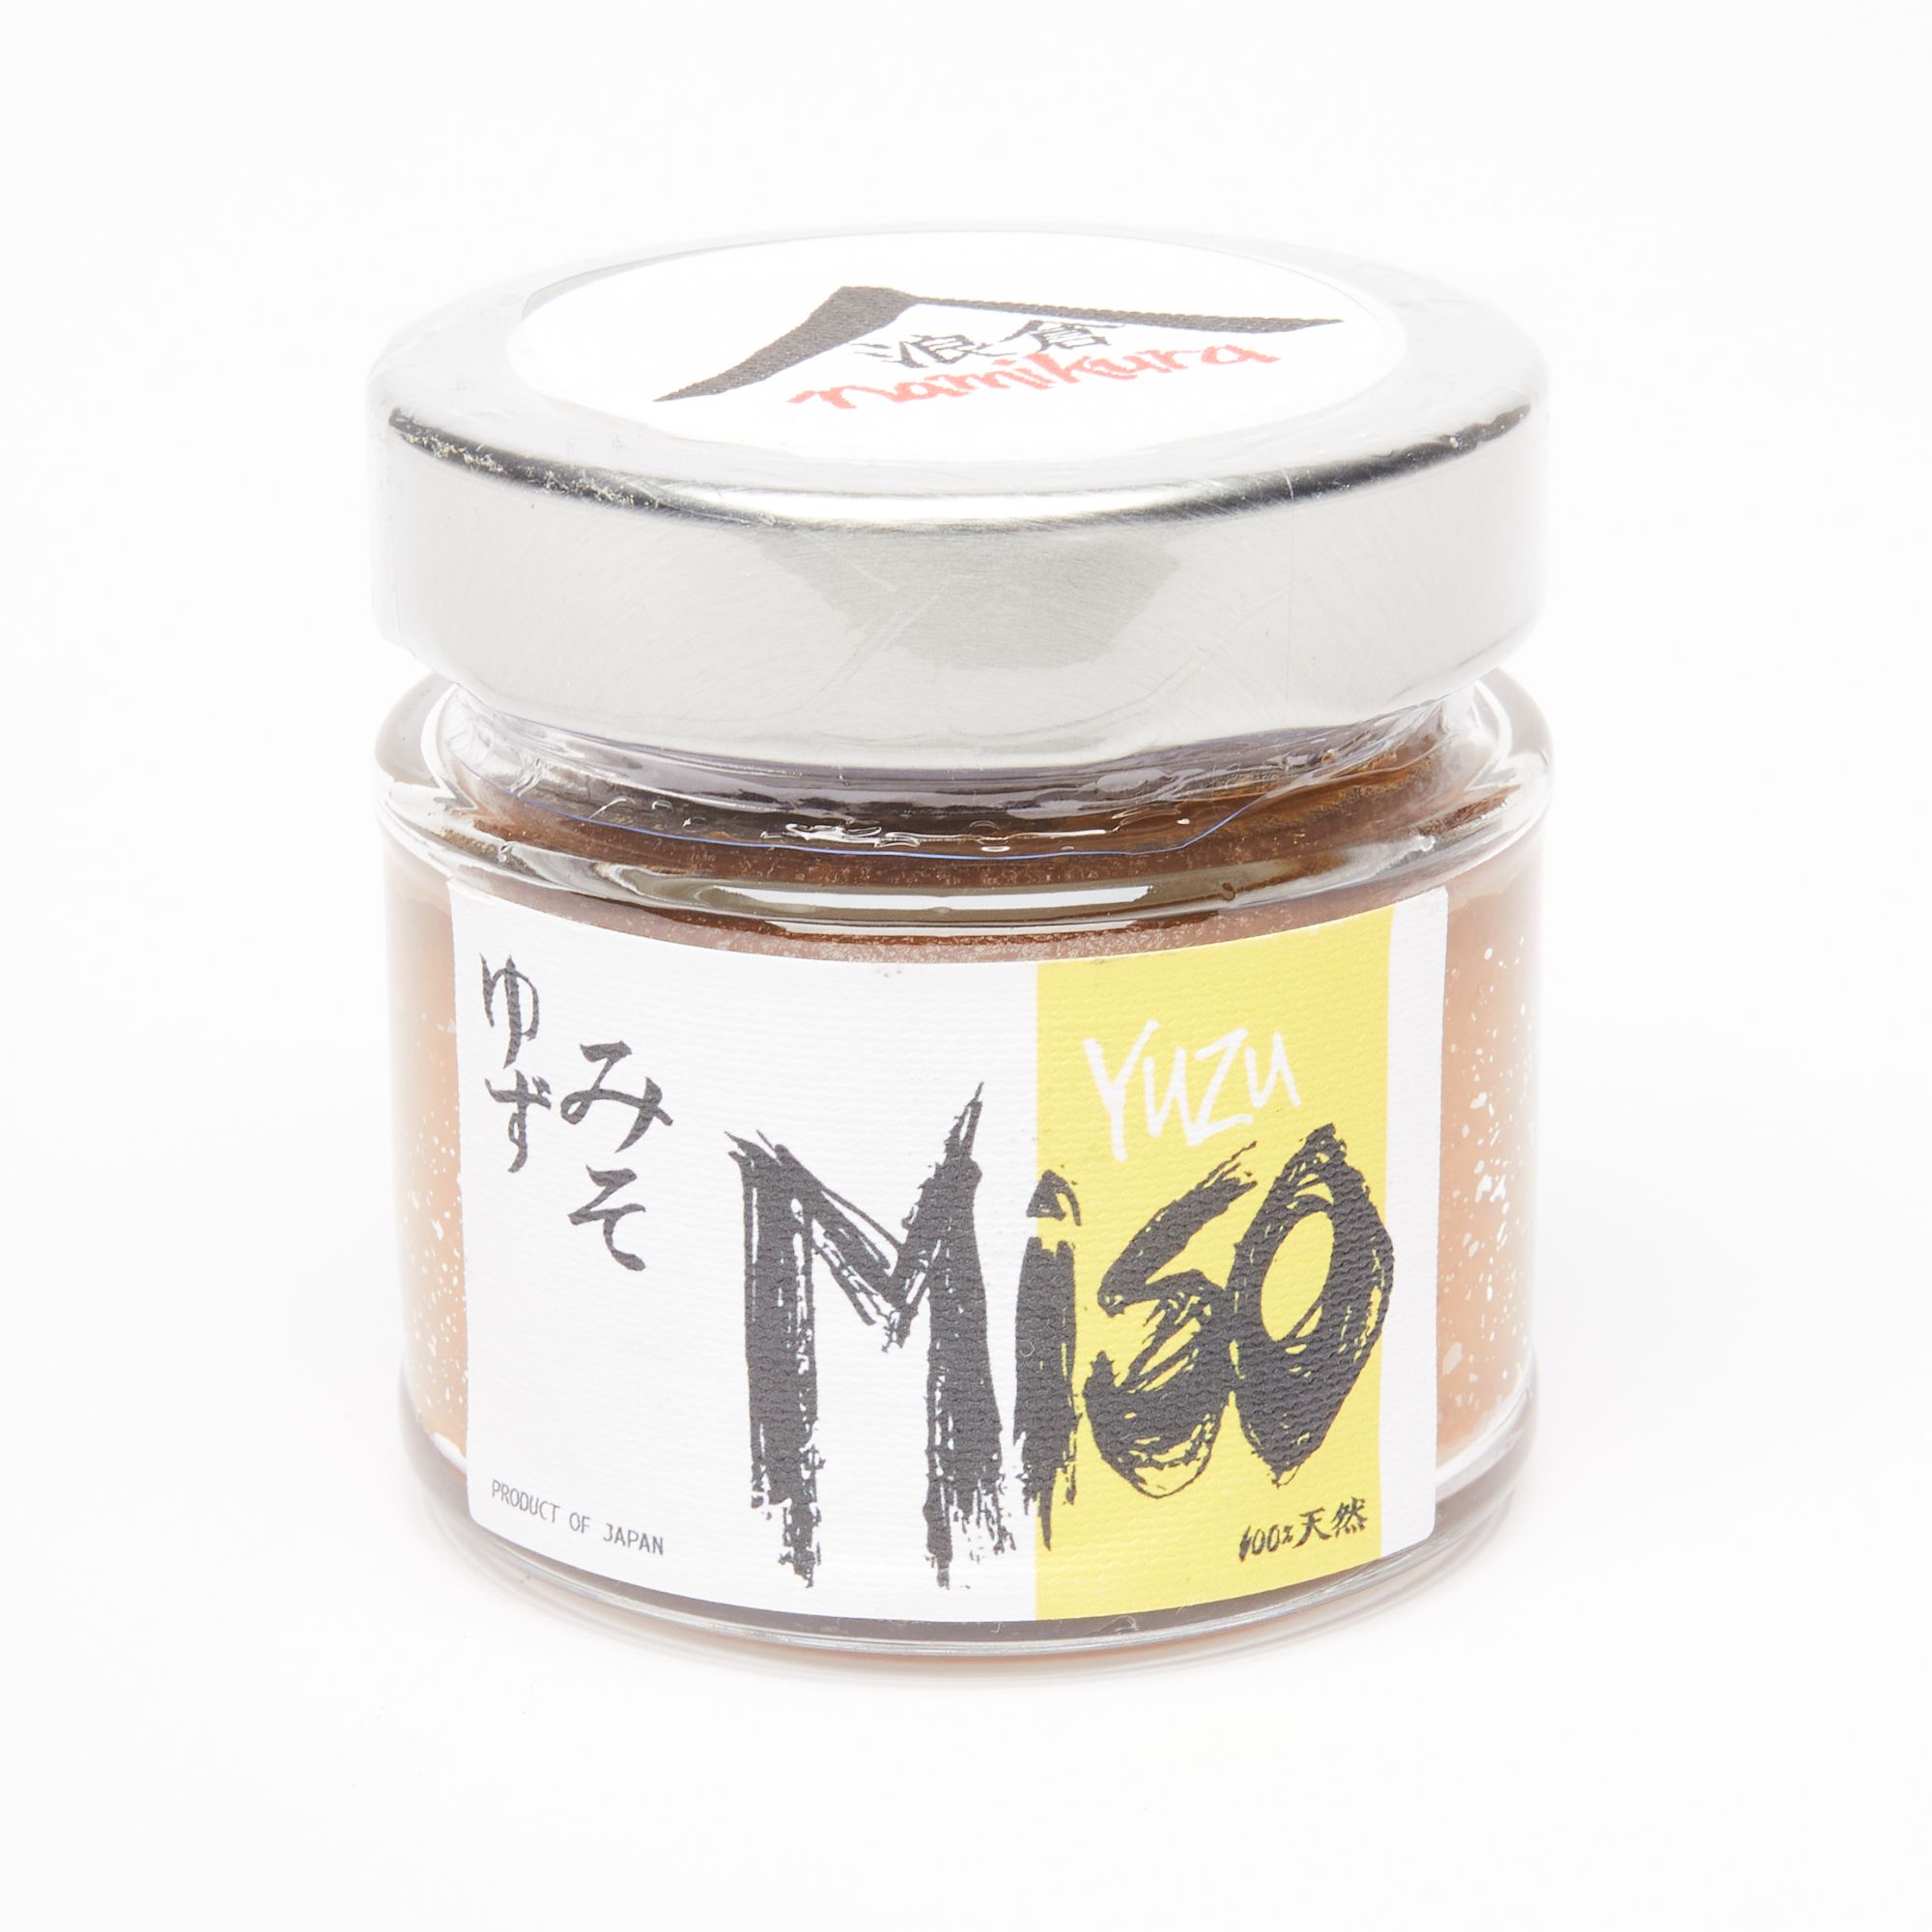 A small clear jar with a metal screw cap with a white and yellow label that reads "Miso".